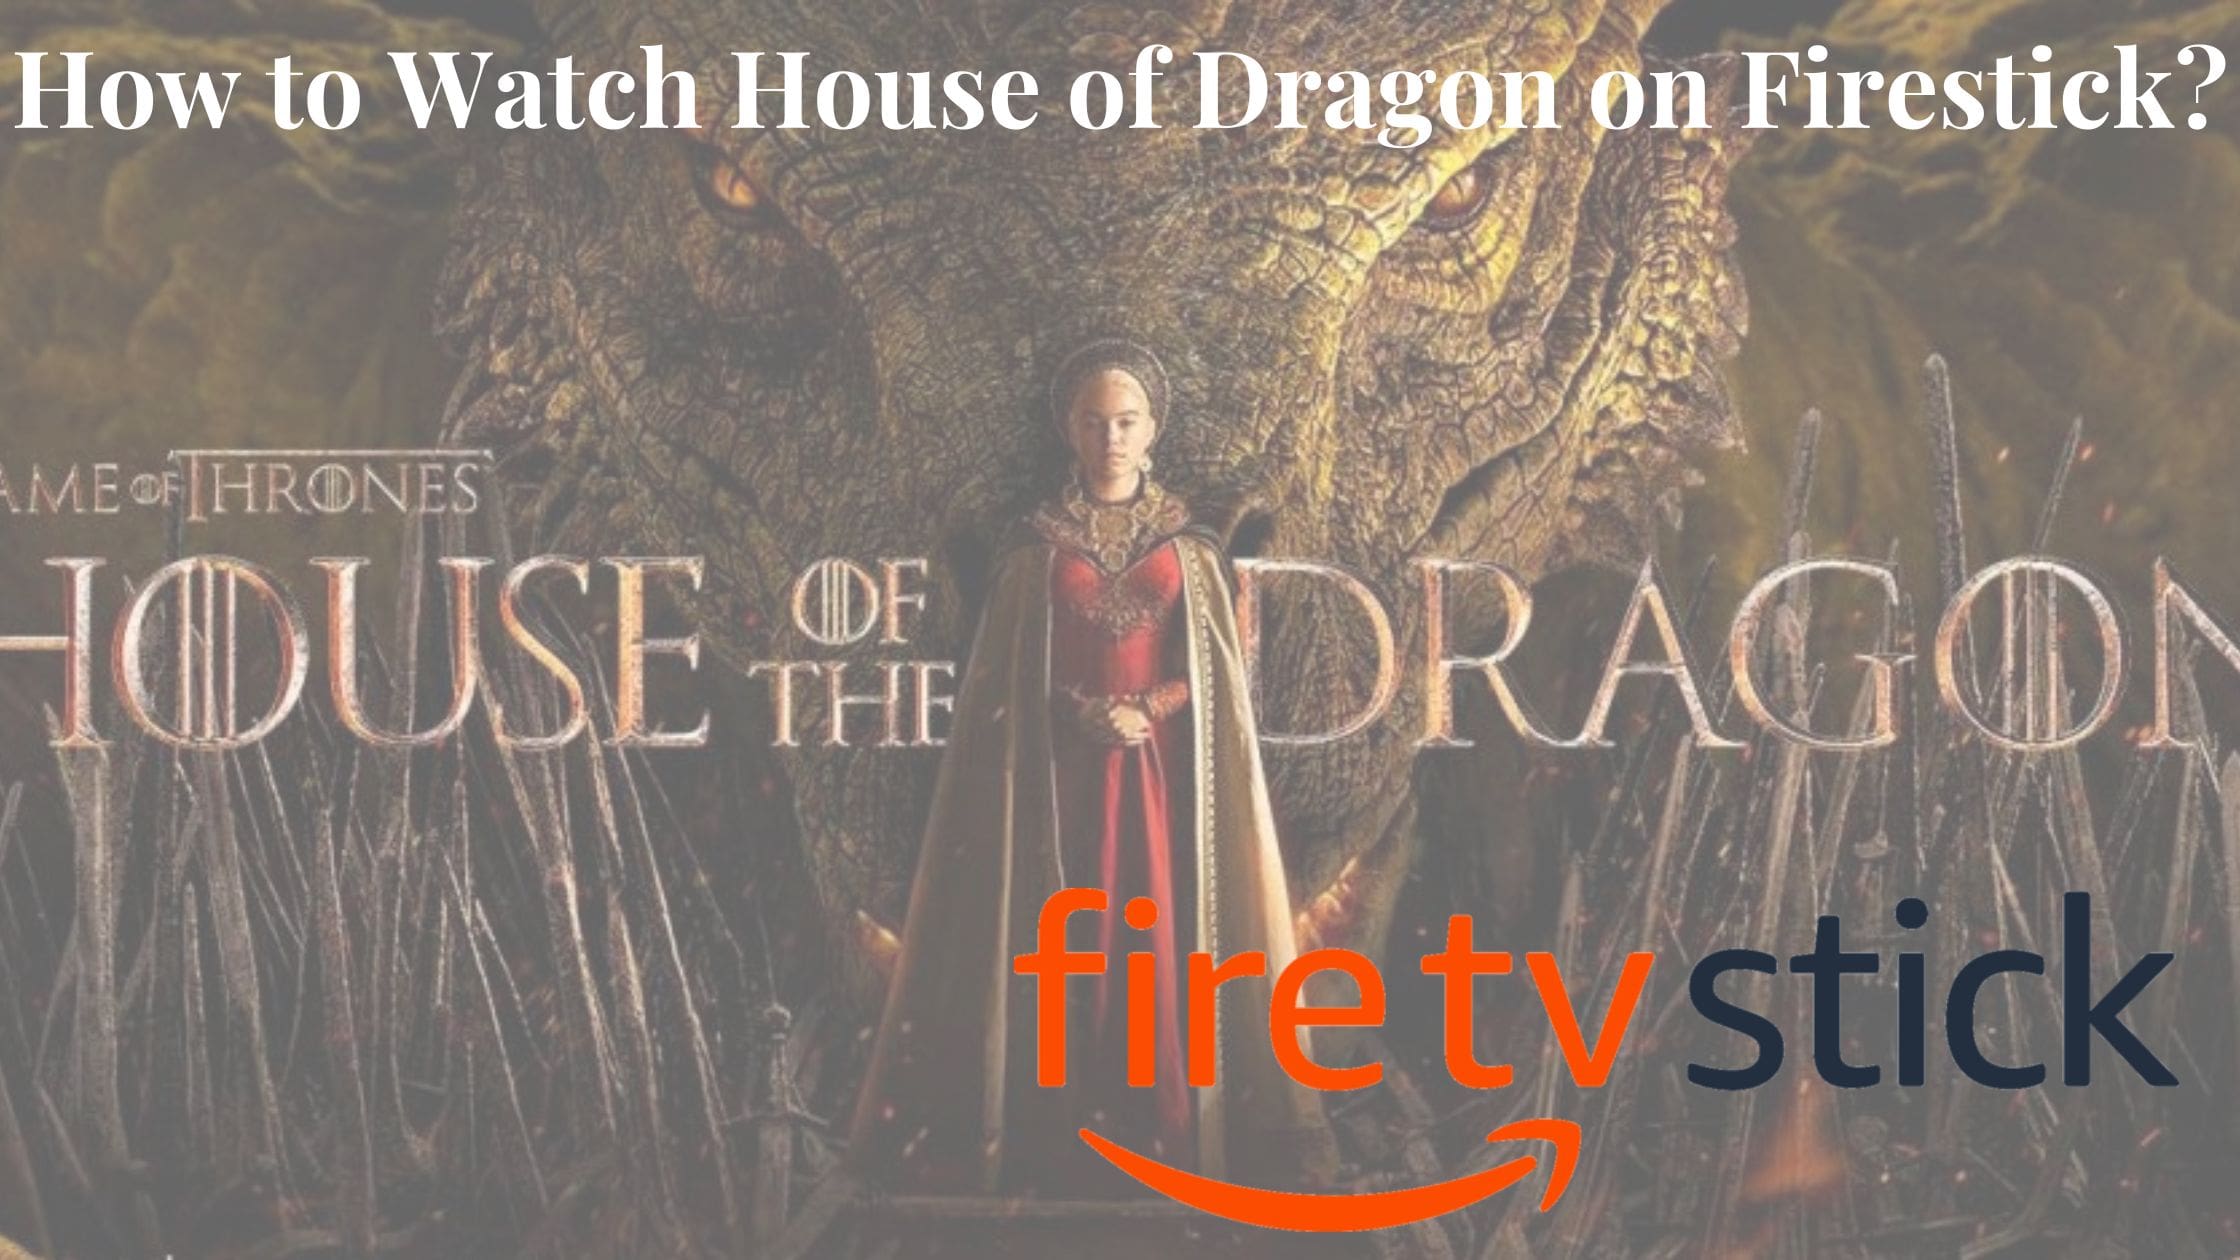 How to Watch House of Dragon on Firestick